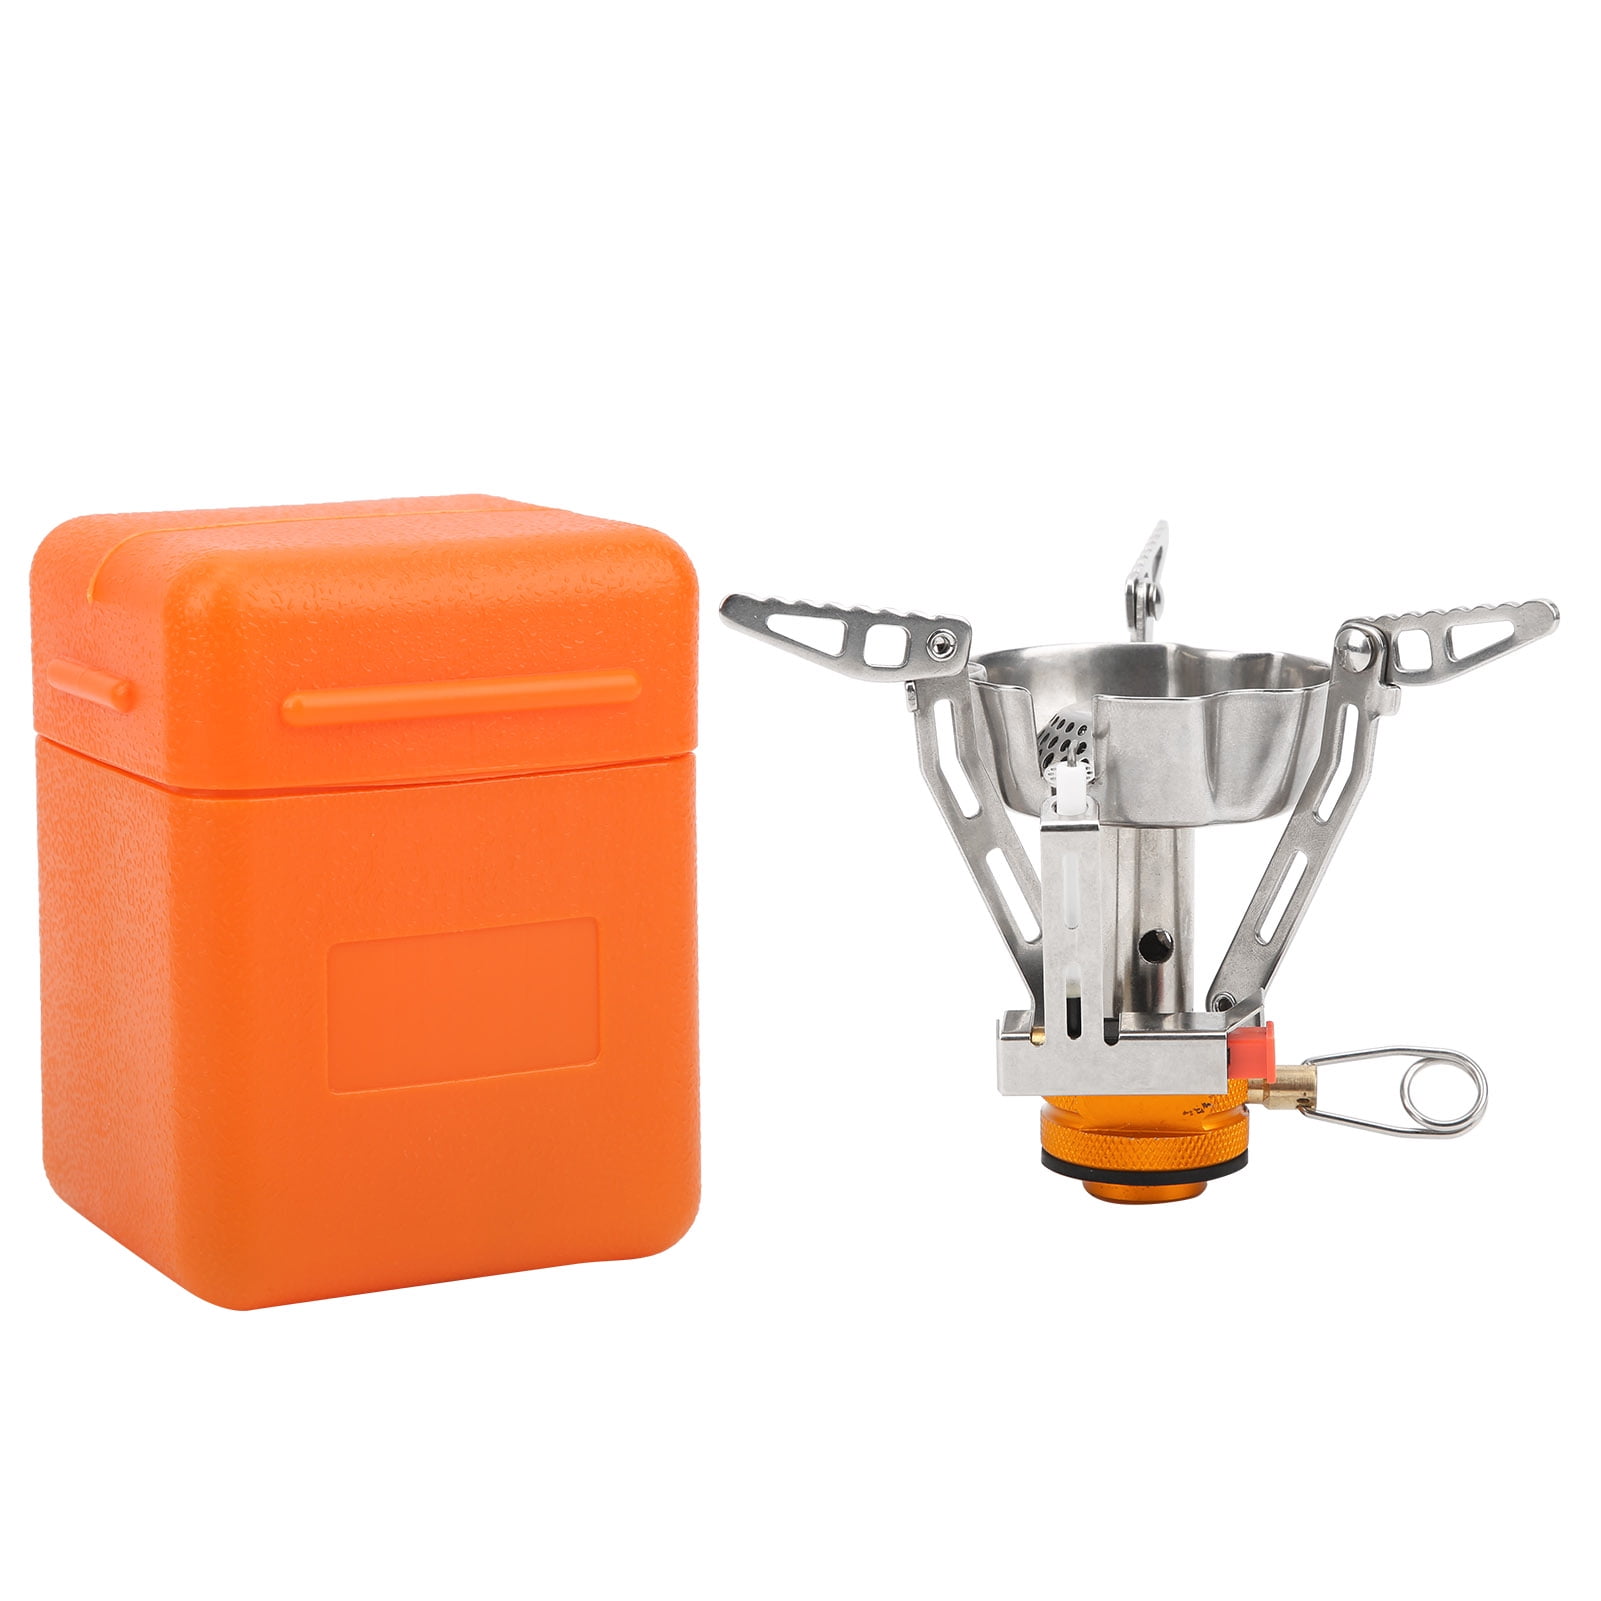 Mini Camping Oven Mini Gas Stove Durable High‑quality Practical Stainless Steel 